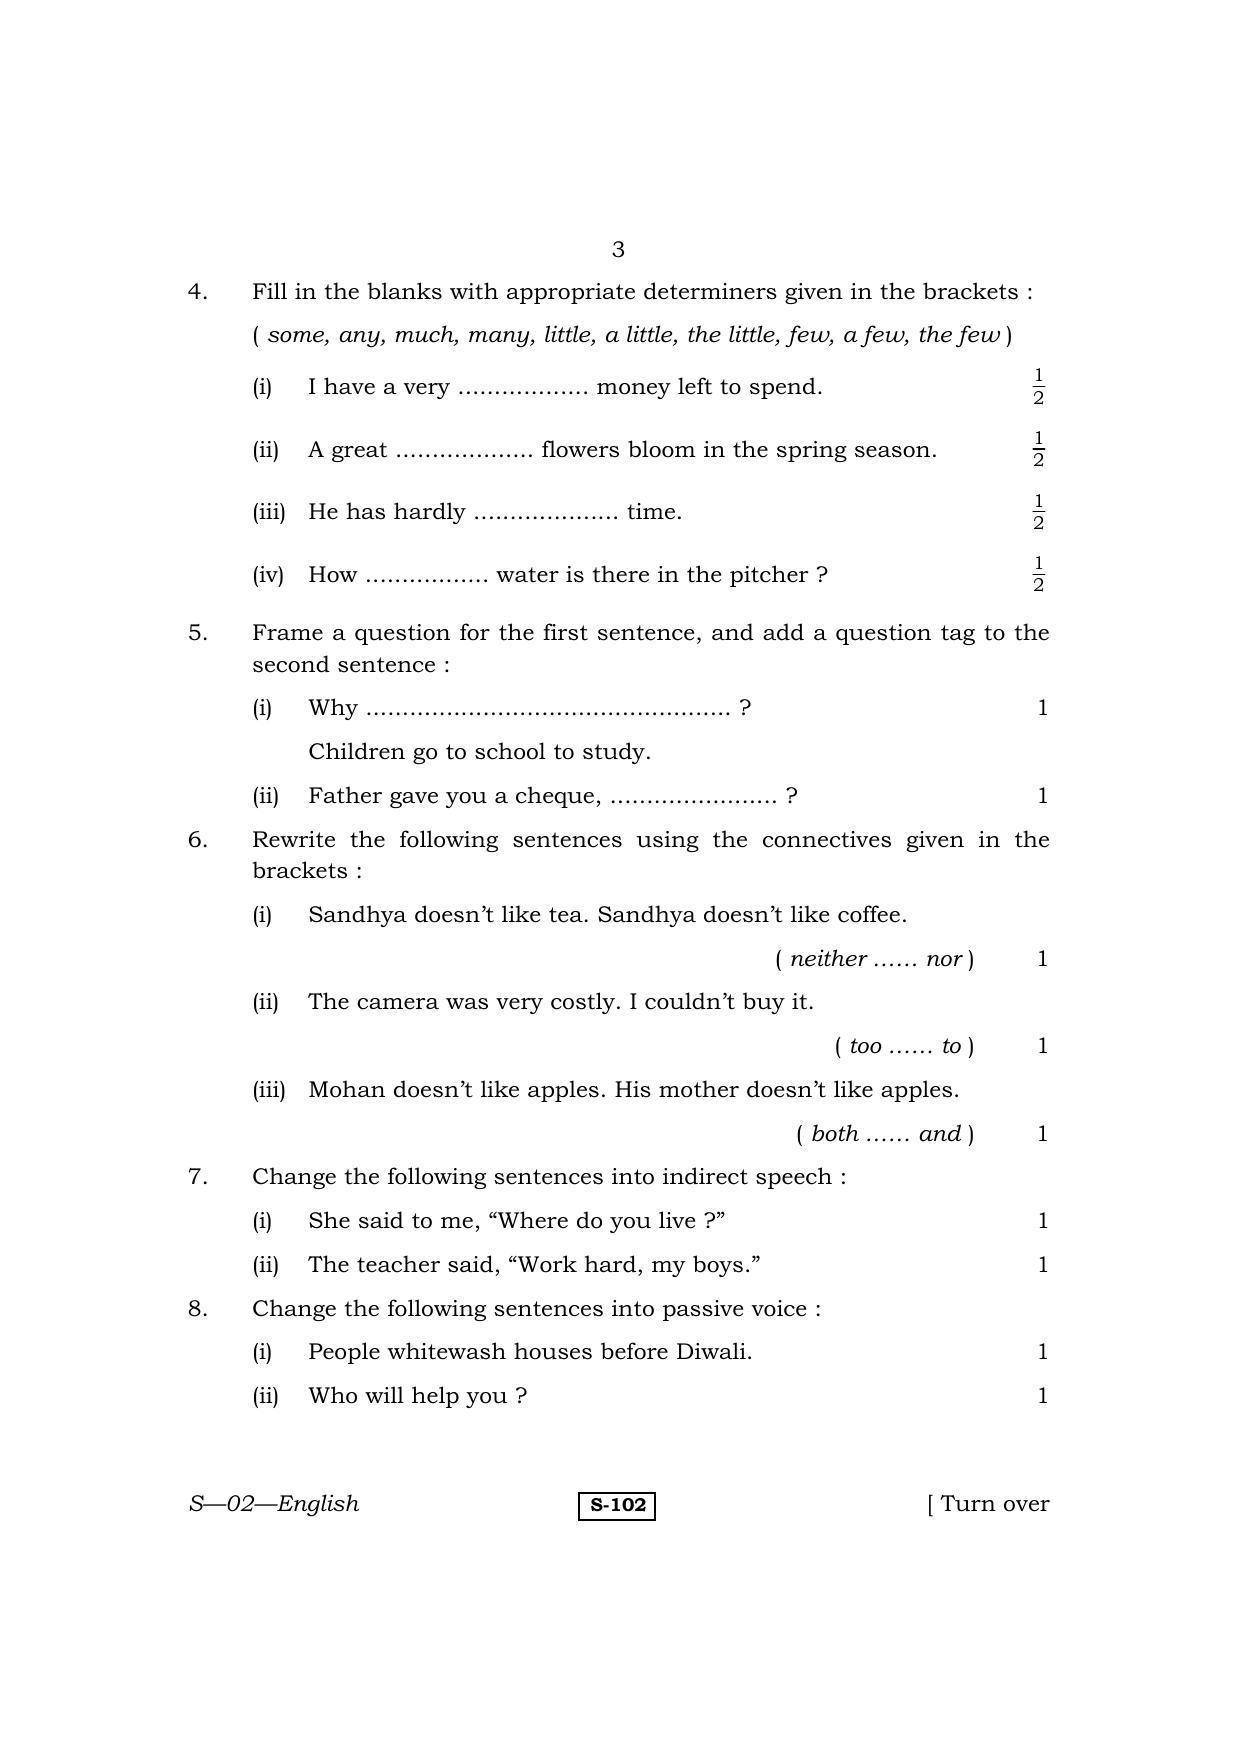 RBSE Class 10 English 2011 Question Paper - Page 3